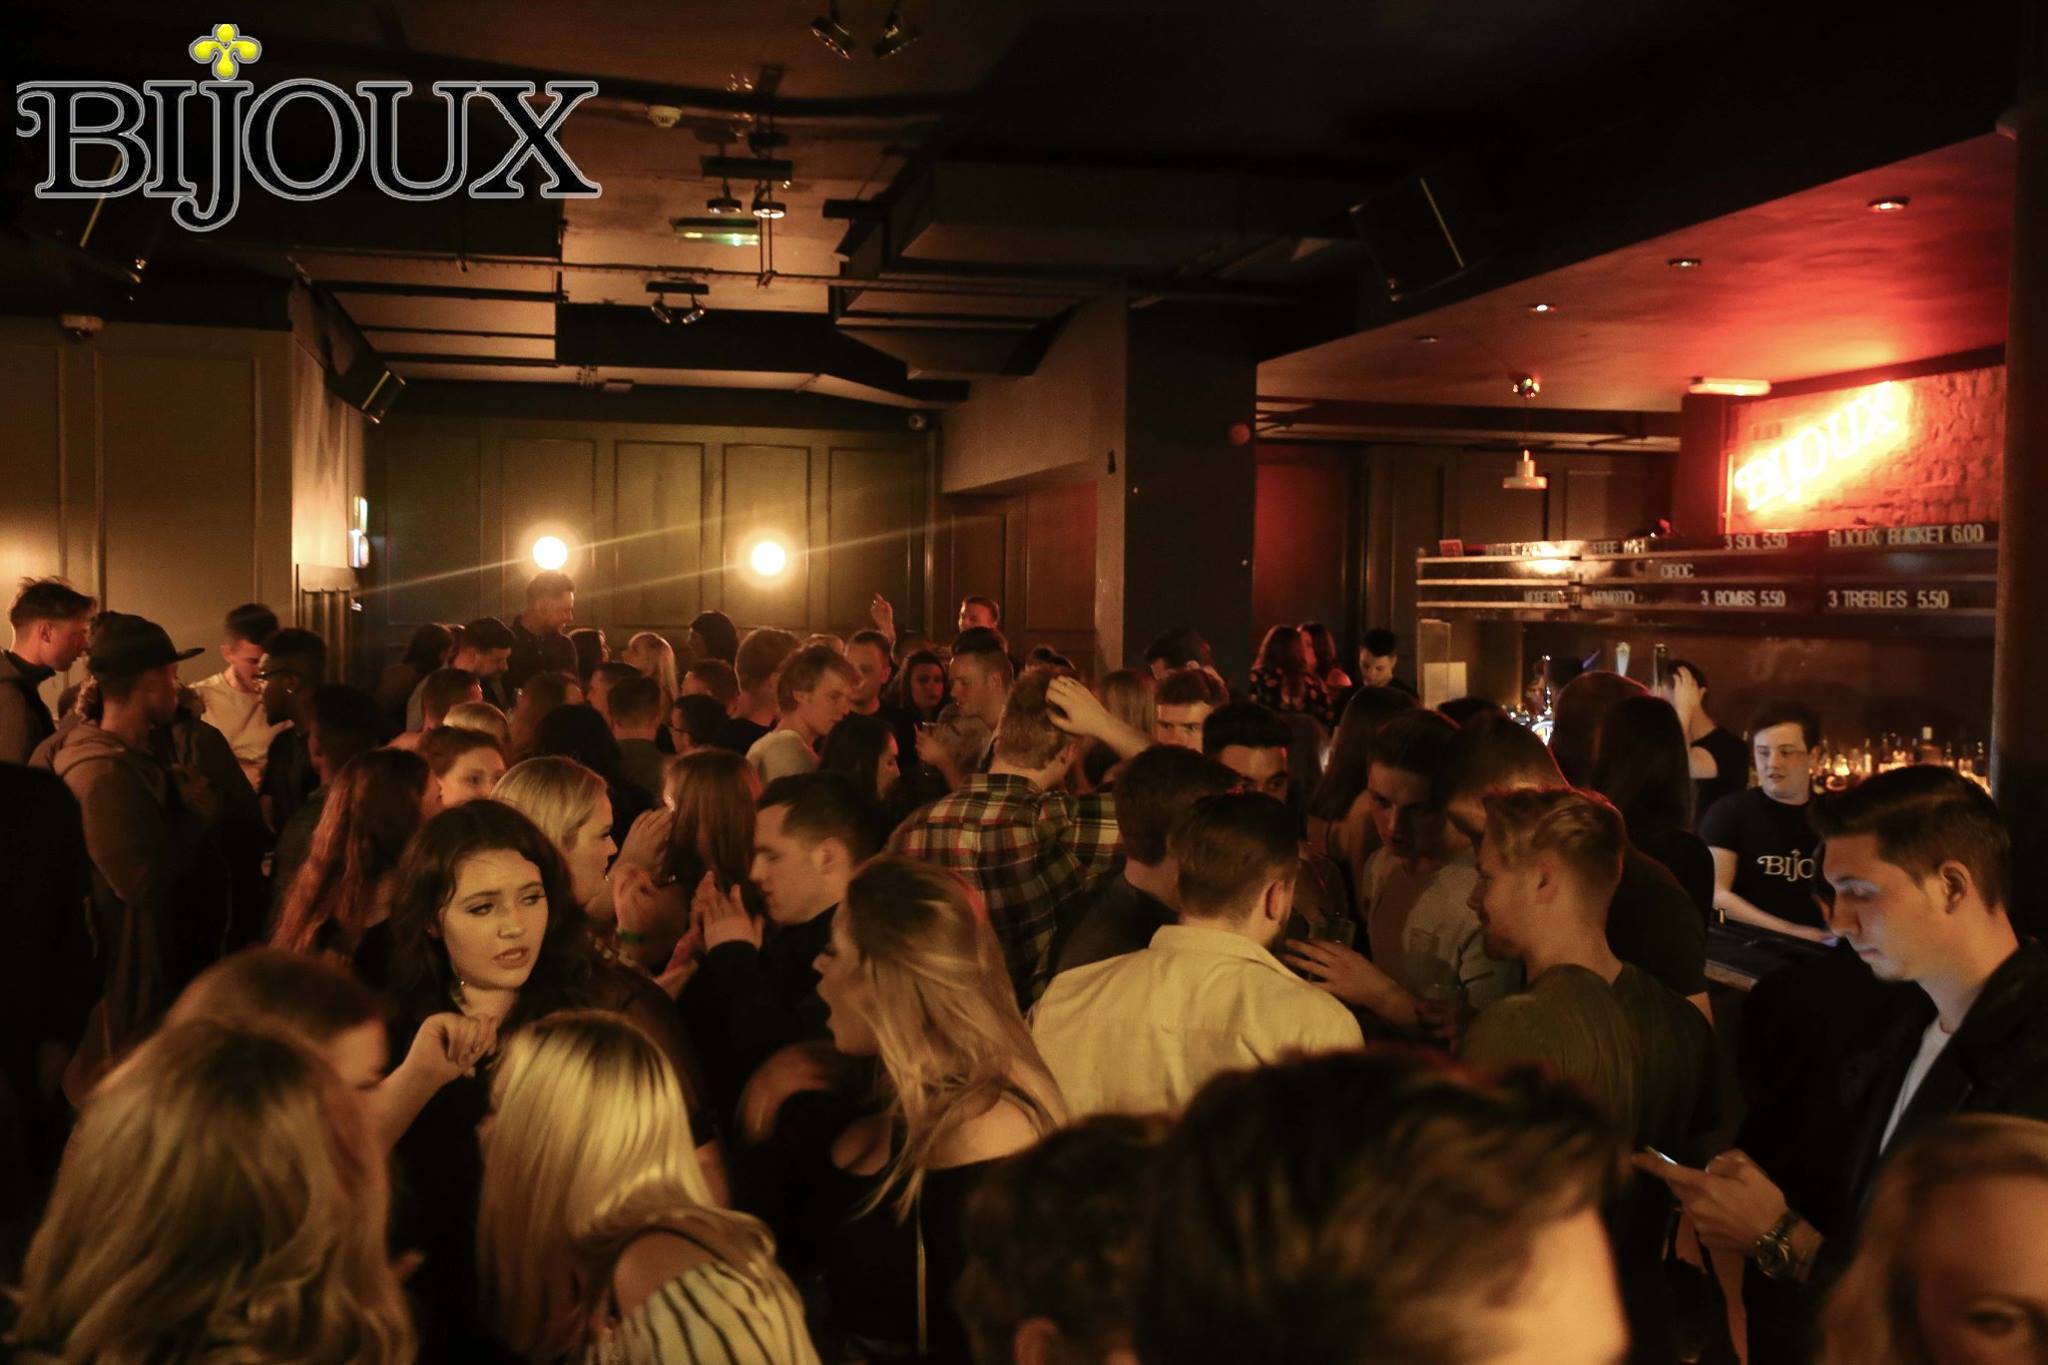 Bijoux Bar Review, with an image of people on the dance floor at Bijoux